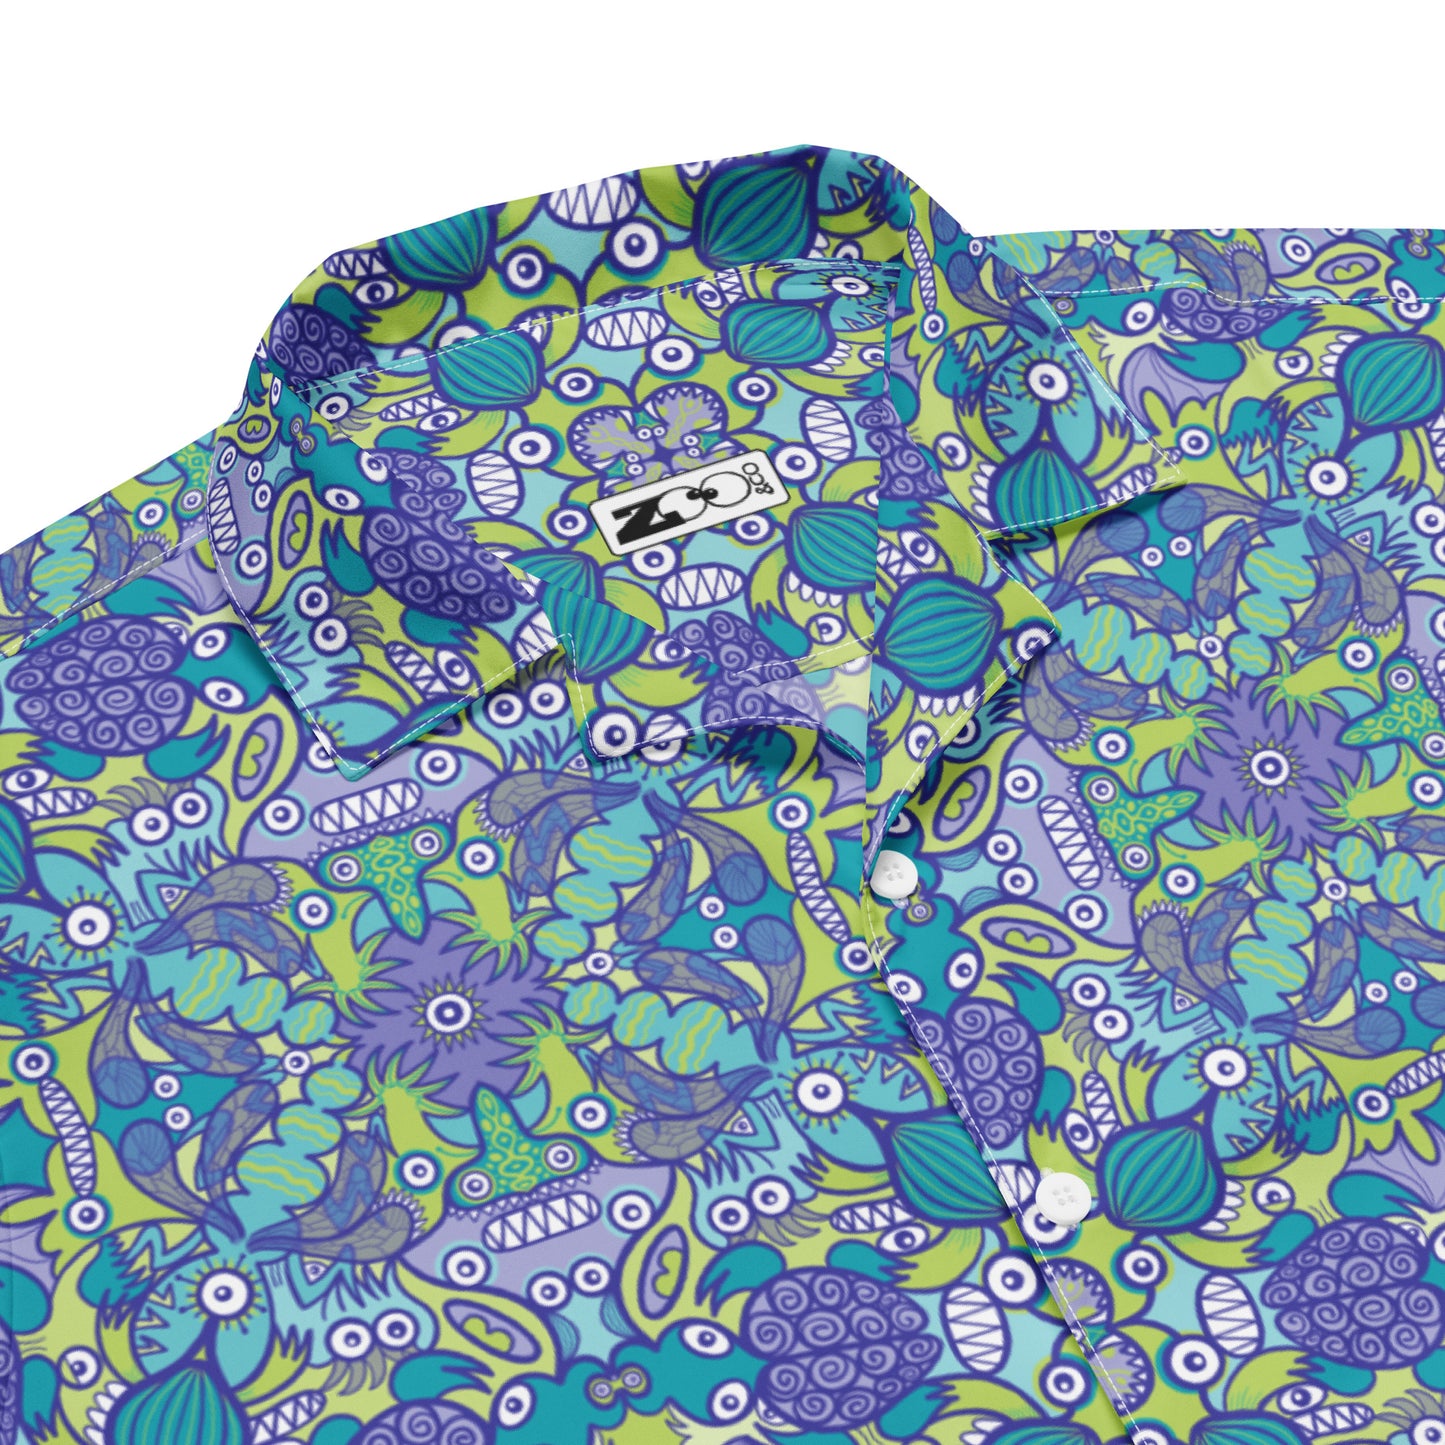 Once upon a time in an ocean full of life - Unisex button shirt. Product detail